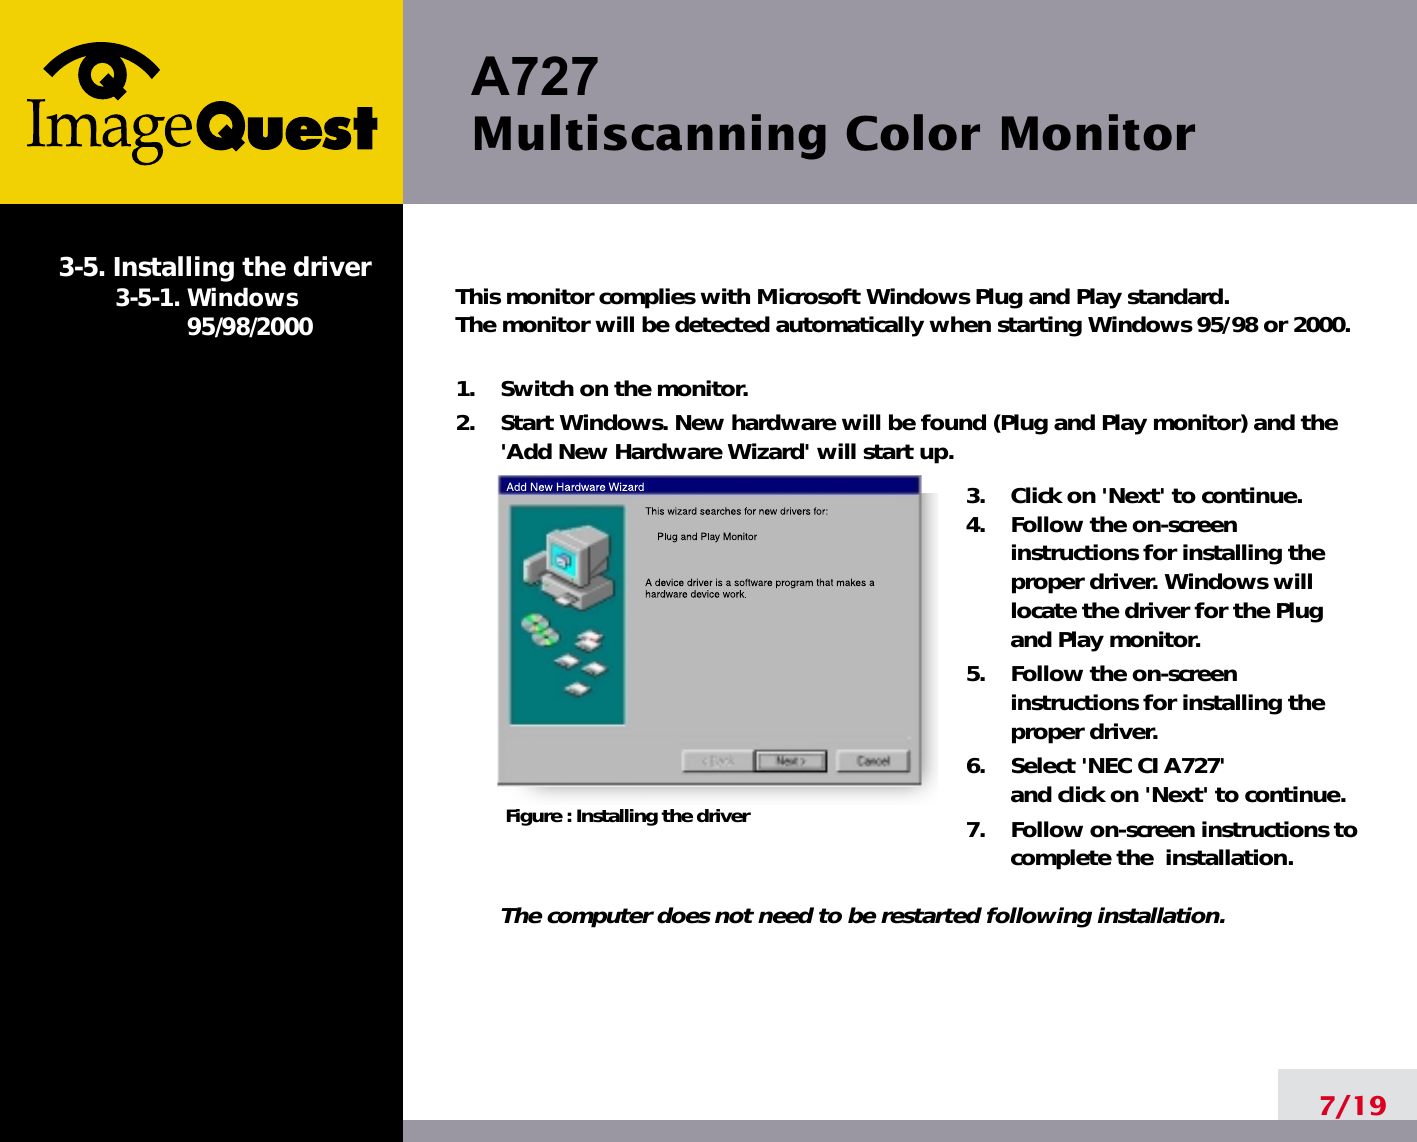 A727 Multiscanning Color Monitor7/19This monitor complies with Microsoft Windows Plug and Play standard. The monitor will be detected automatically when starting Windows 95/98 or 2000.1.    Switch on the monitor.2.    Start Windows. New hardware will be found (Plug and Play monitor) and the&apos;Add New Hardware Wizard&apos; will start up.3.    Click on &apos;Next&apos; to continue. 4.    Follow the on-screeninstructions for installing theproper driver. Windows willlocate the driver for the Plugand Play monitor.5.    Follow the on-screeninstructions for installing theproper driver.6.    Select &apos;NEC CI A727&apos;and click on &apos;Next&apos; to continue.7.    Follow on-screen instructions tocomplete the  installation.The computer does not need to be restarted following installation.3-5. Installing the driver3-5-1. Windows95/98/2000Figure : Installing the driver